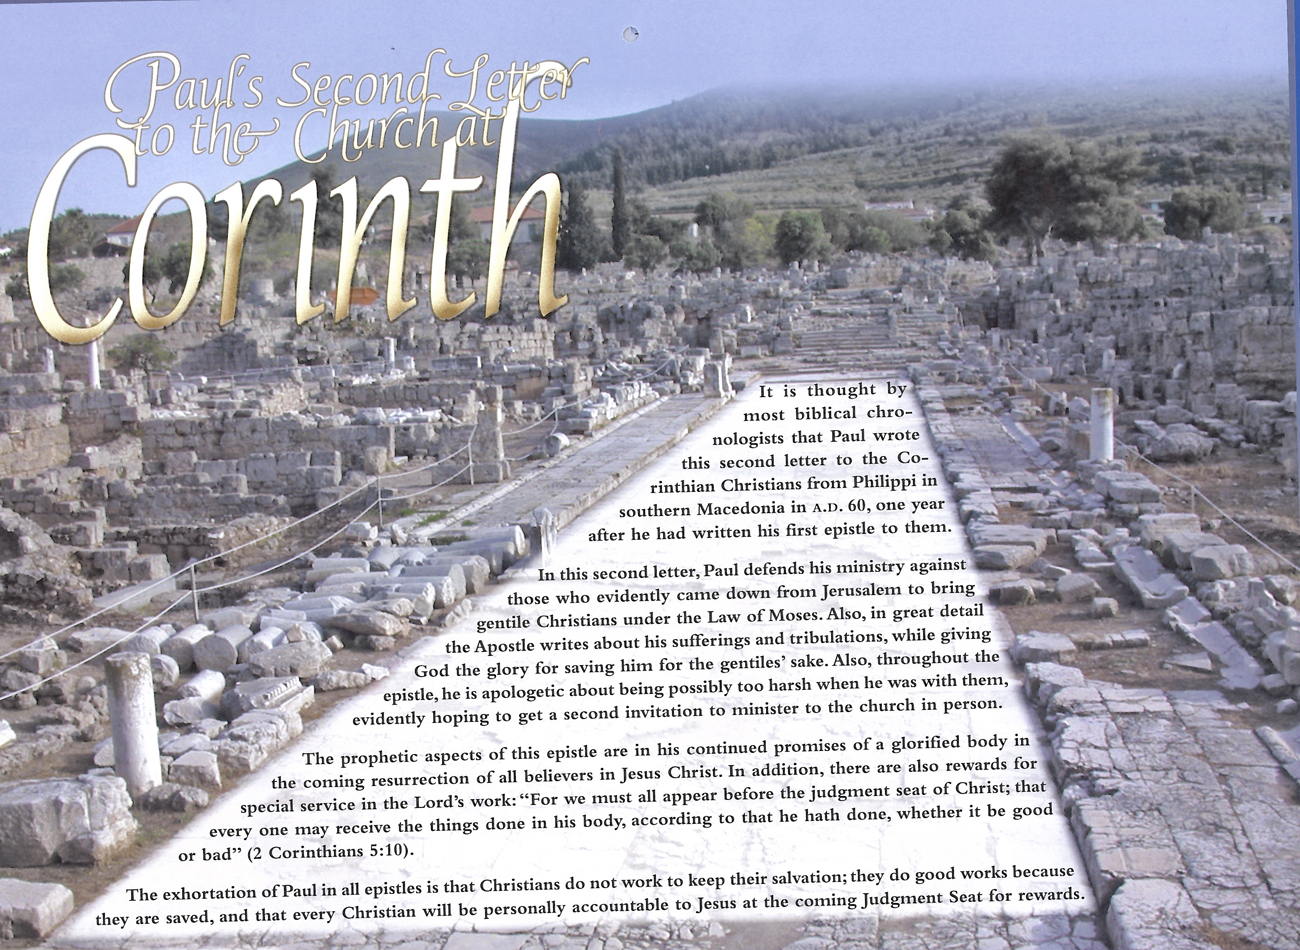 2012 Prophecy Calendar: March - Paul's Second Letter to the Chuirch at Corinth